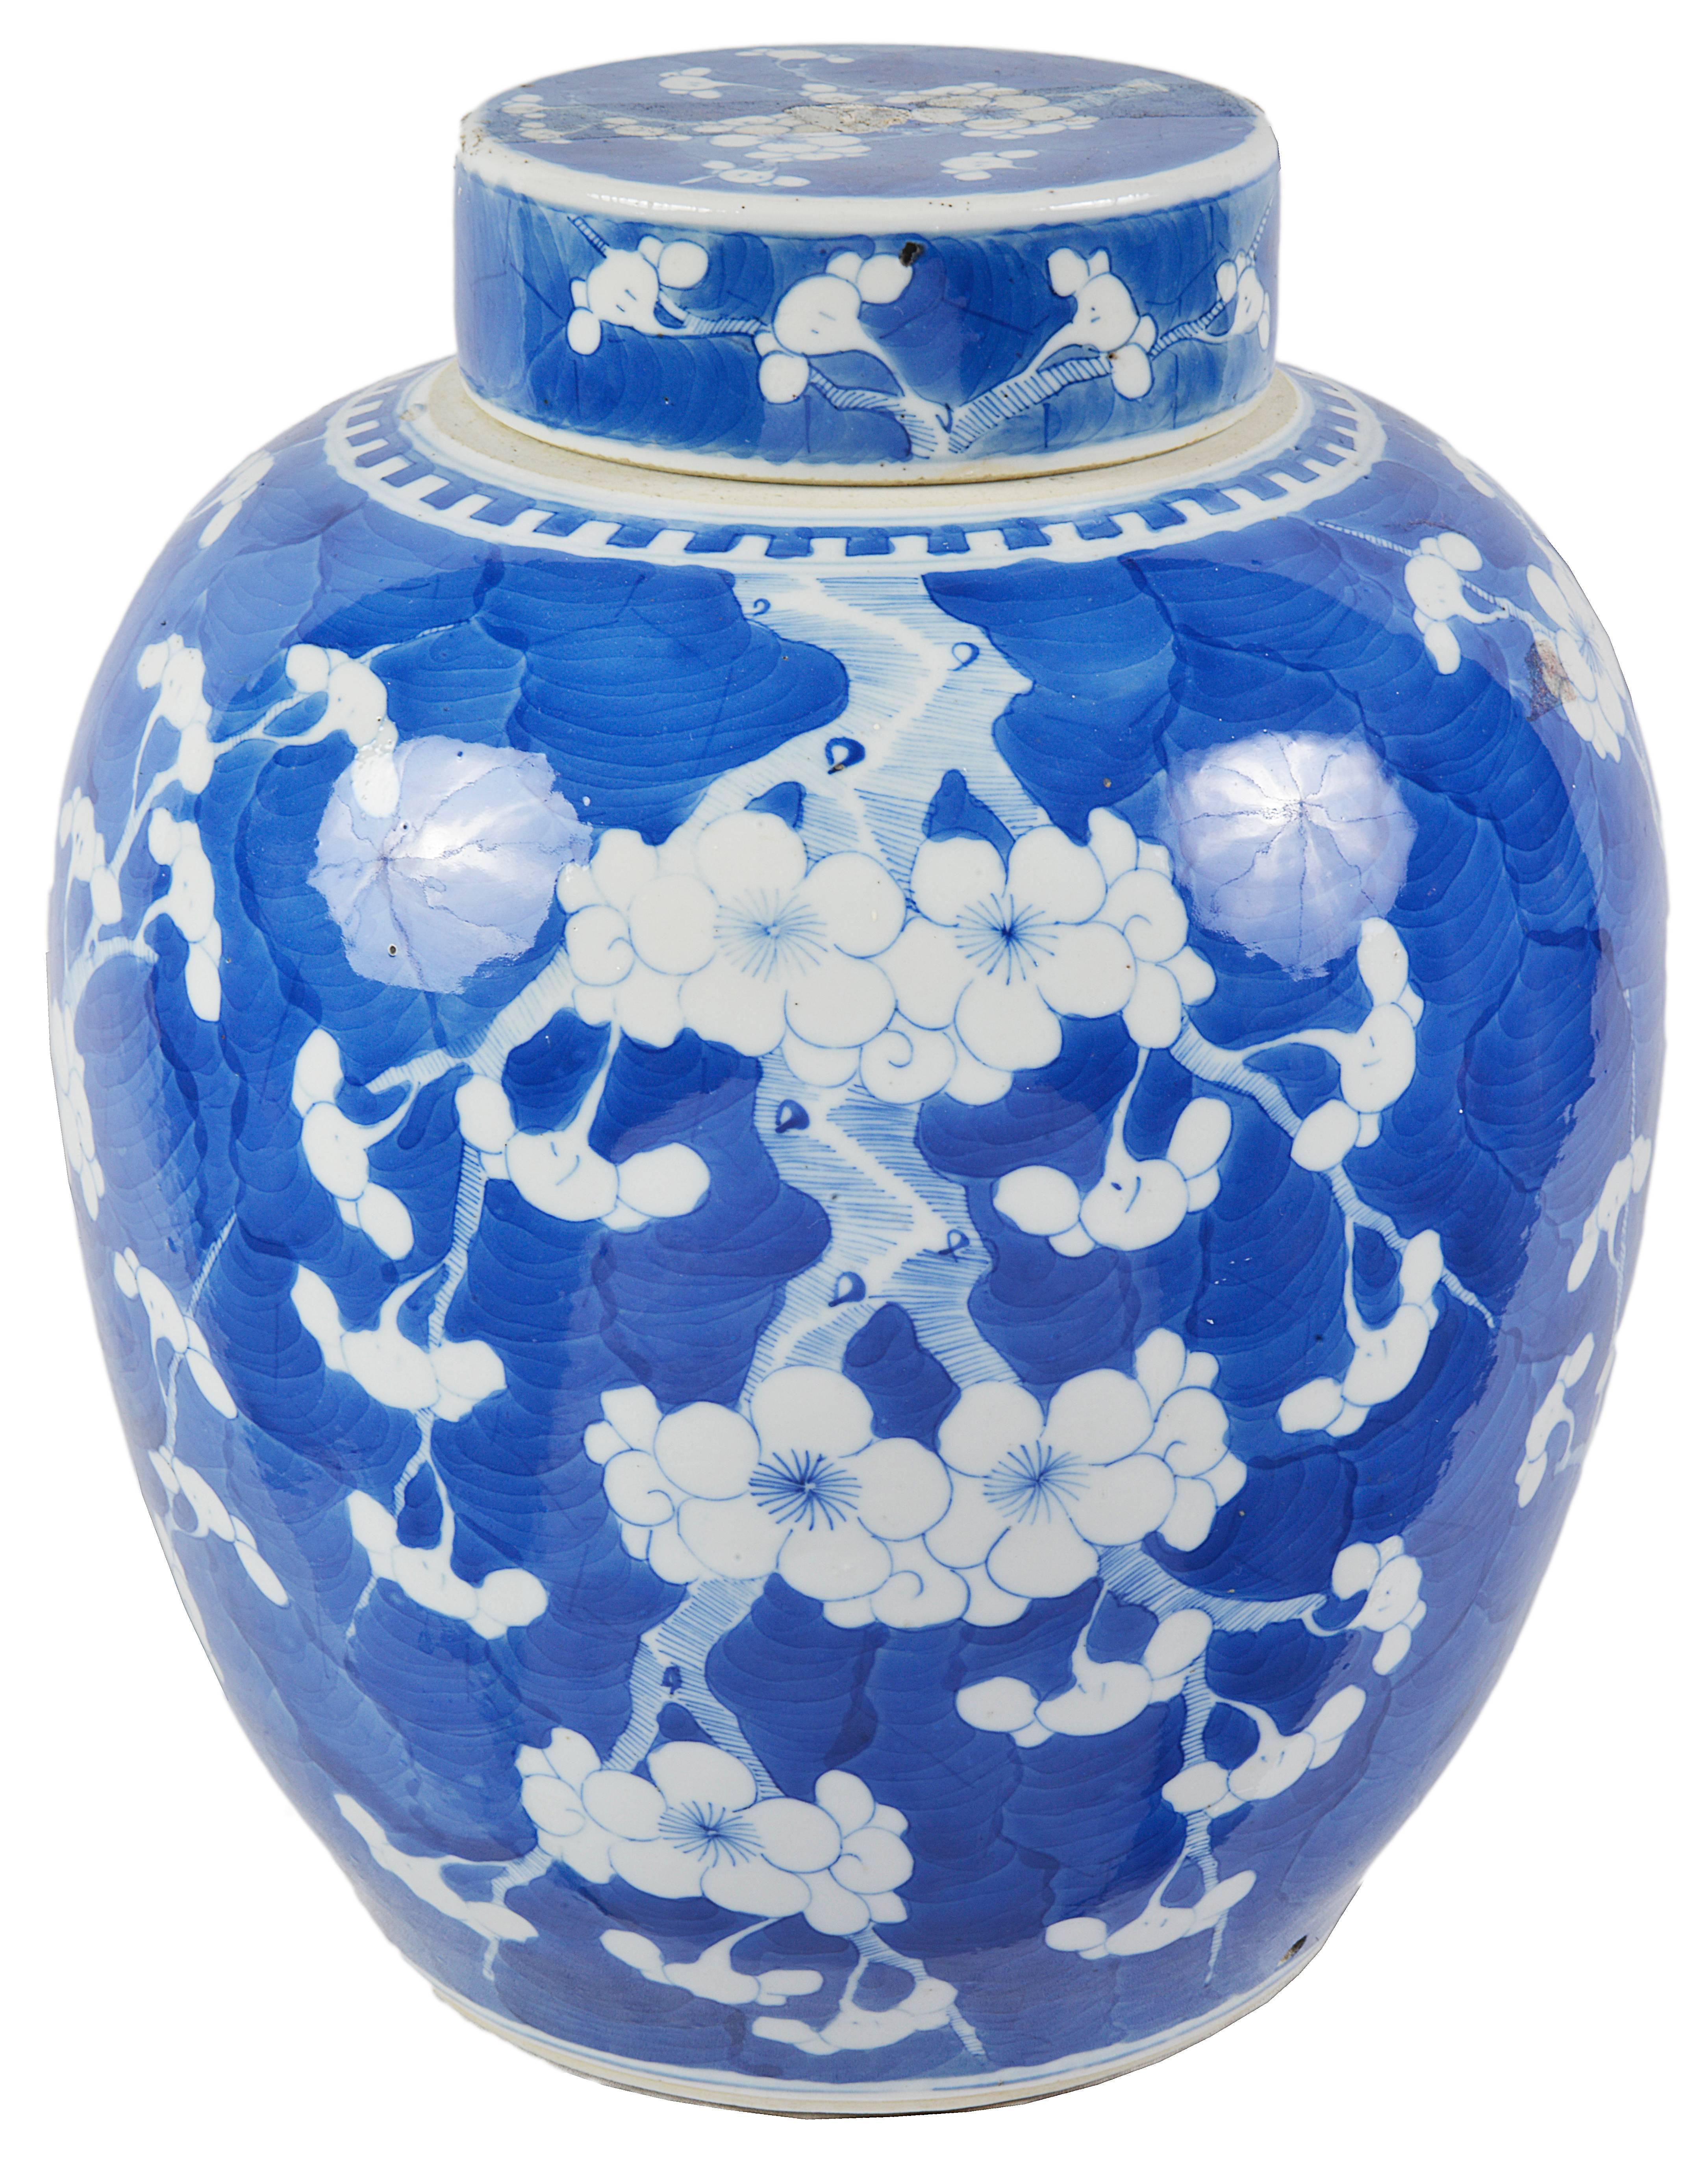 A good quality 19th century Chinese blue and white lidded prunes blossom ginger jar.